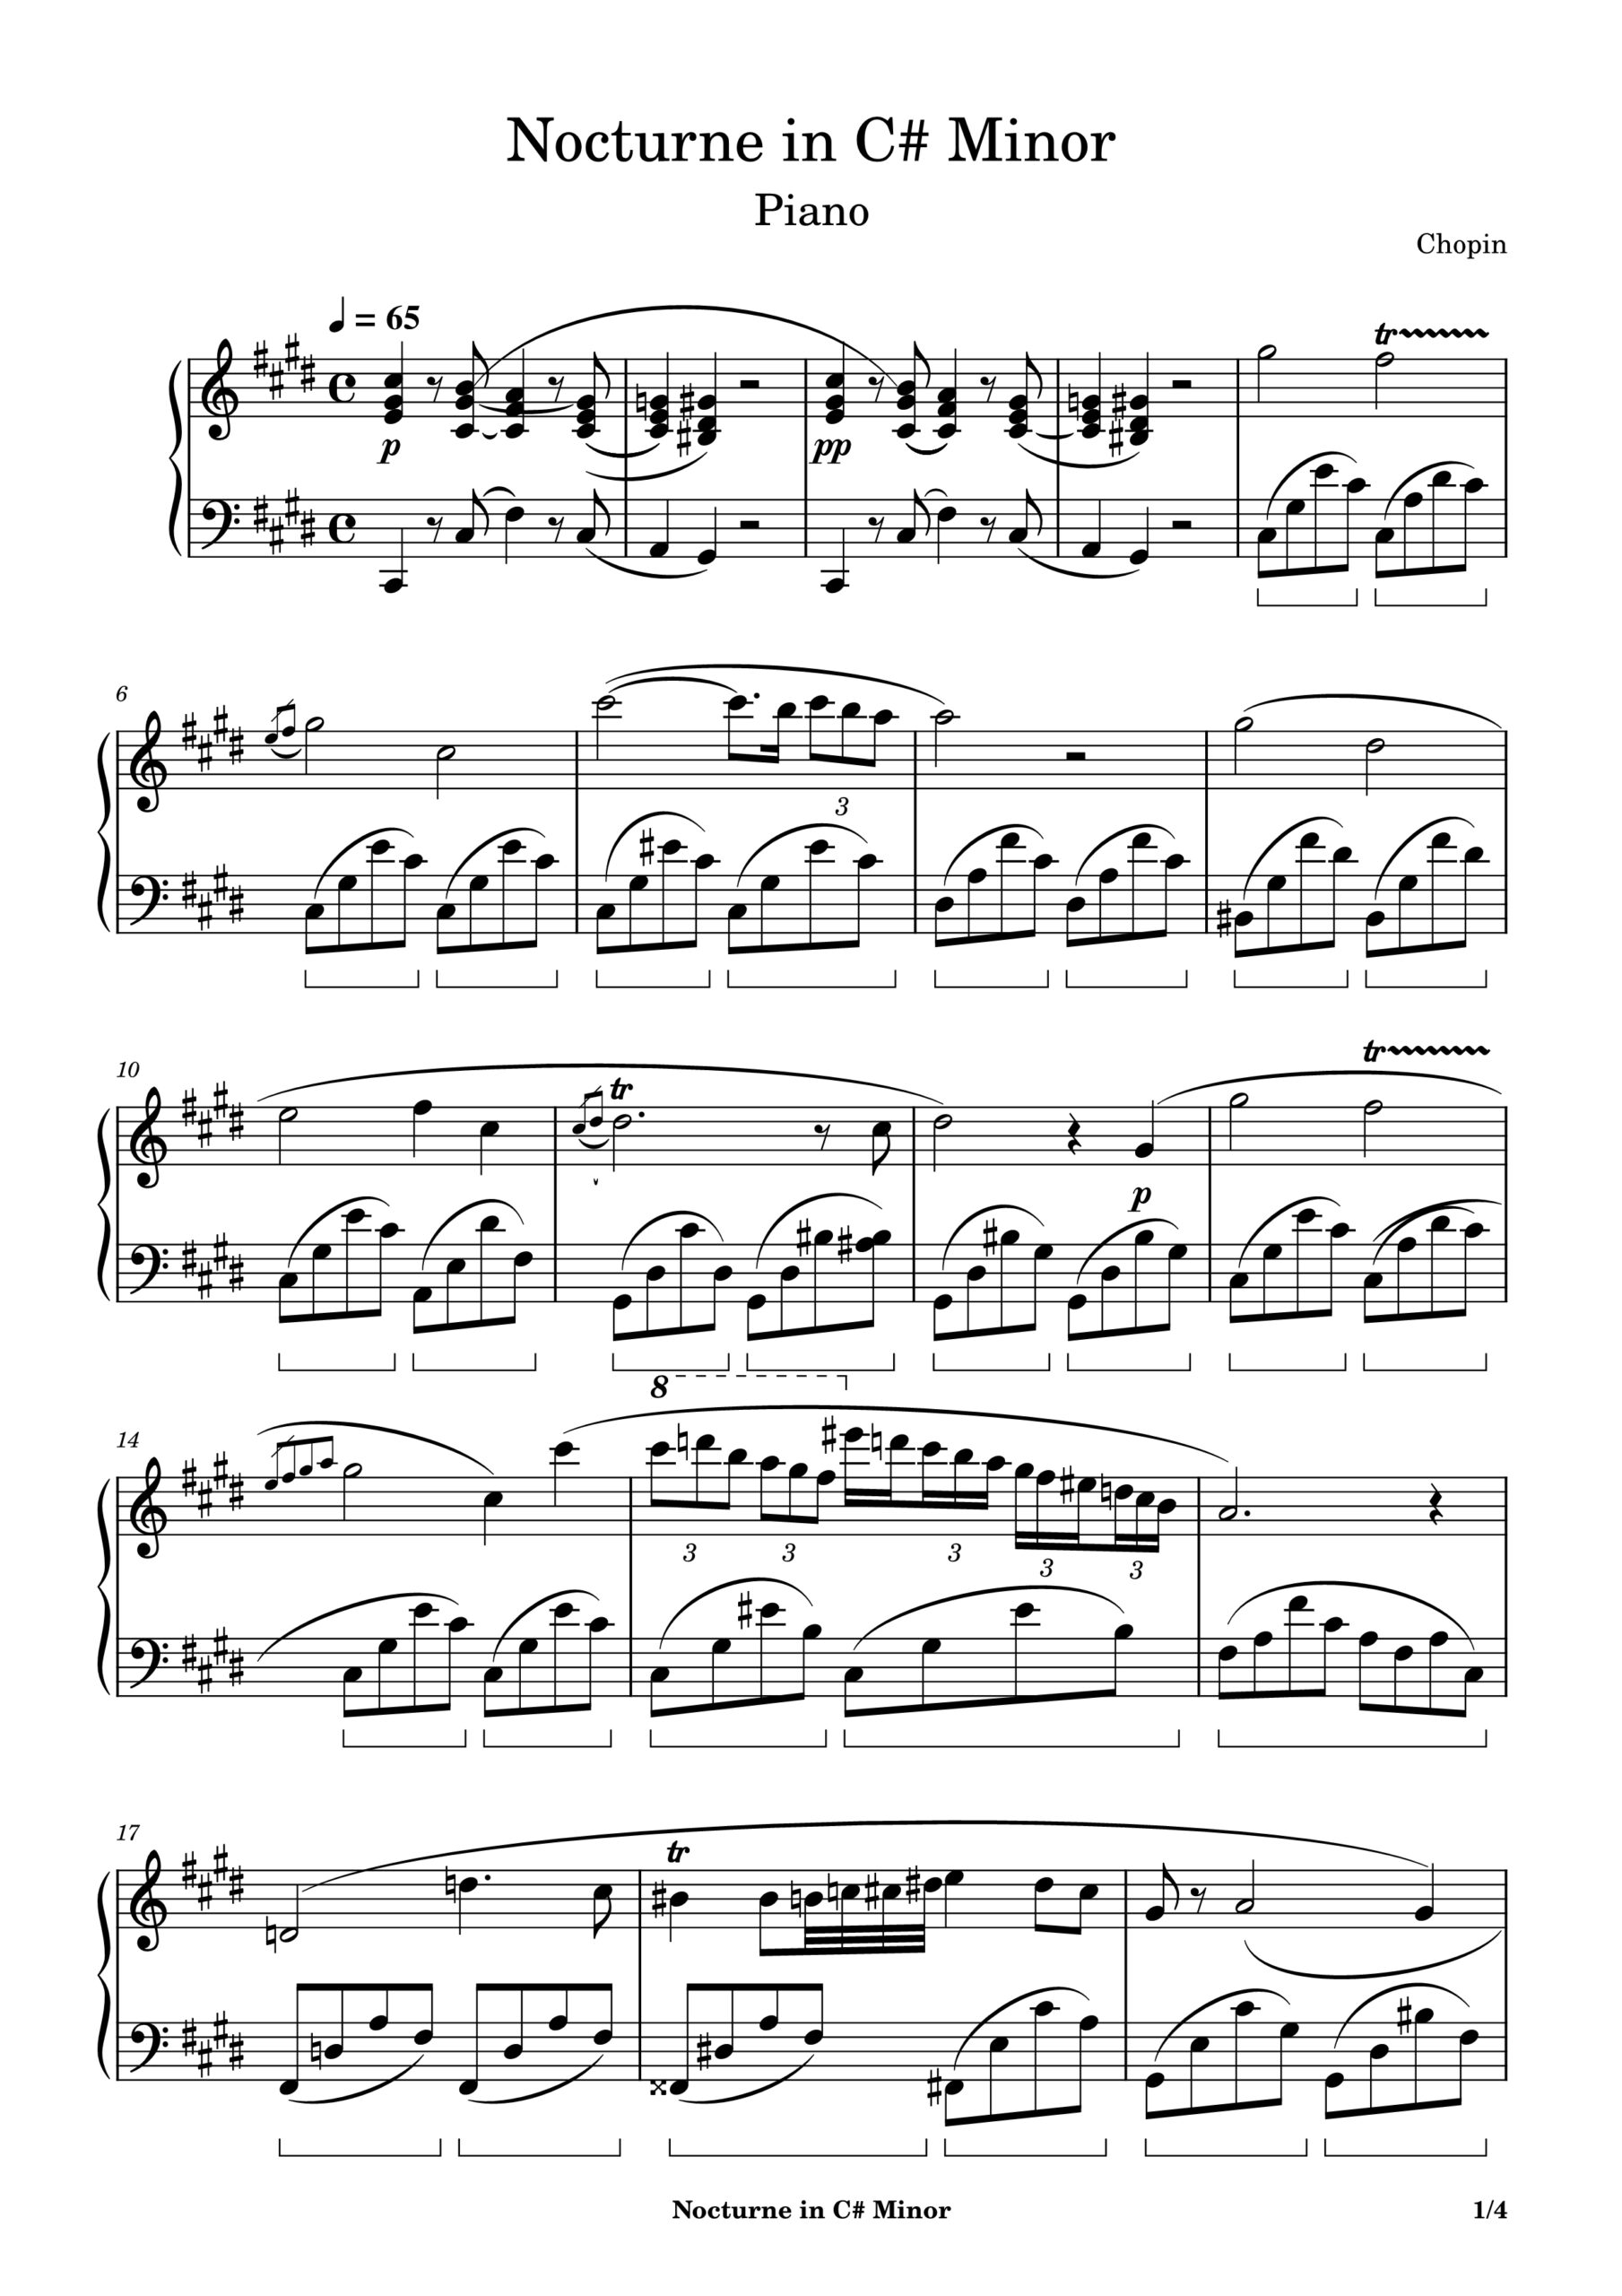 Chopin, Nocturne in C# Minor Sheet Music Page 1